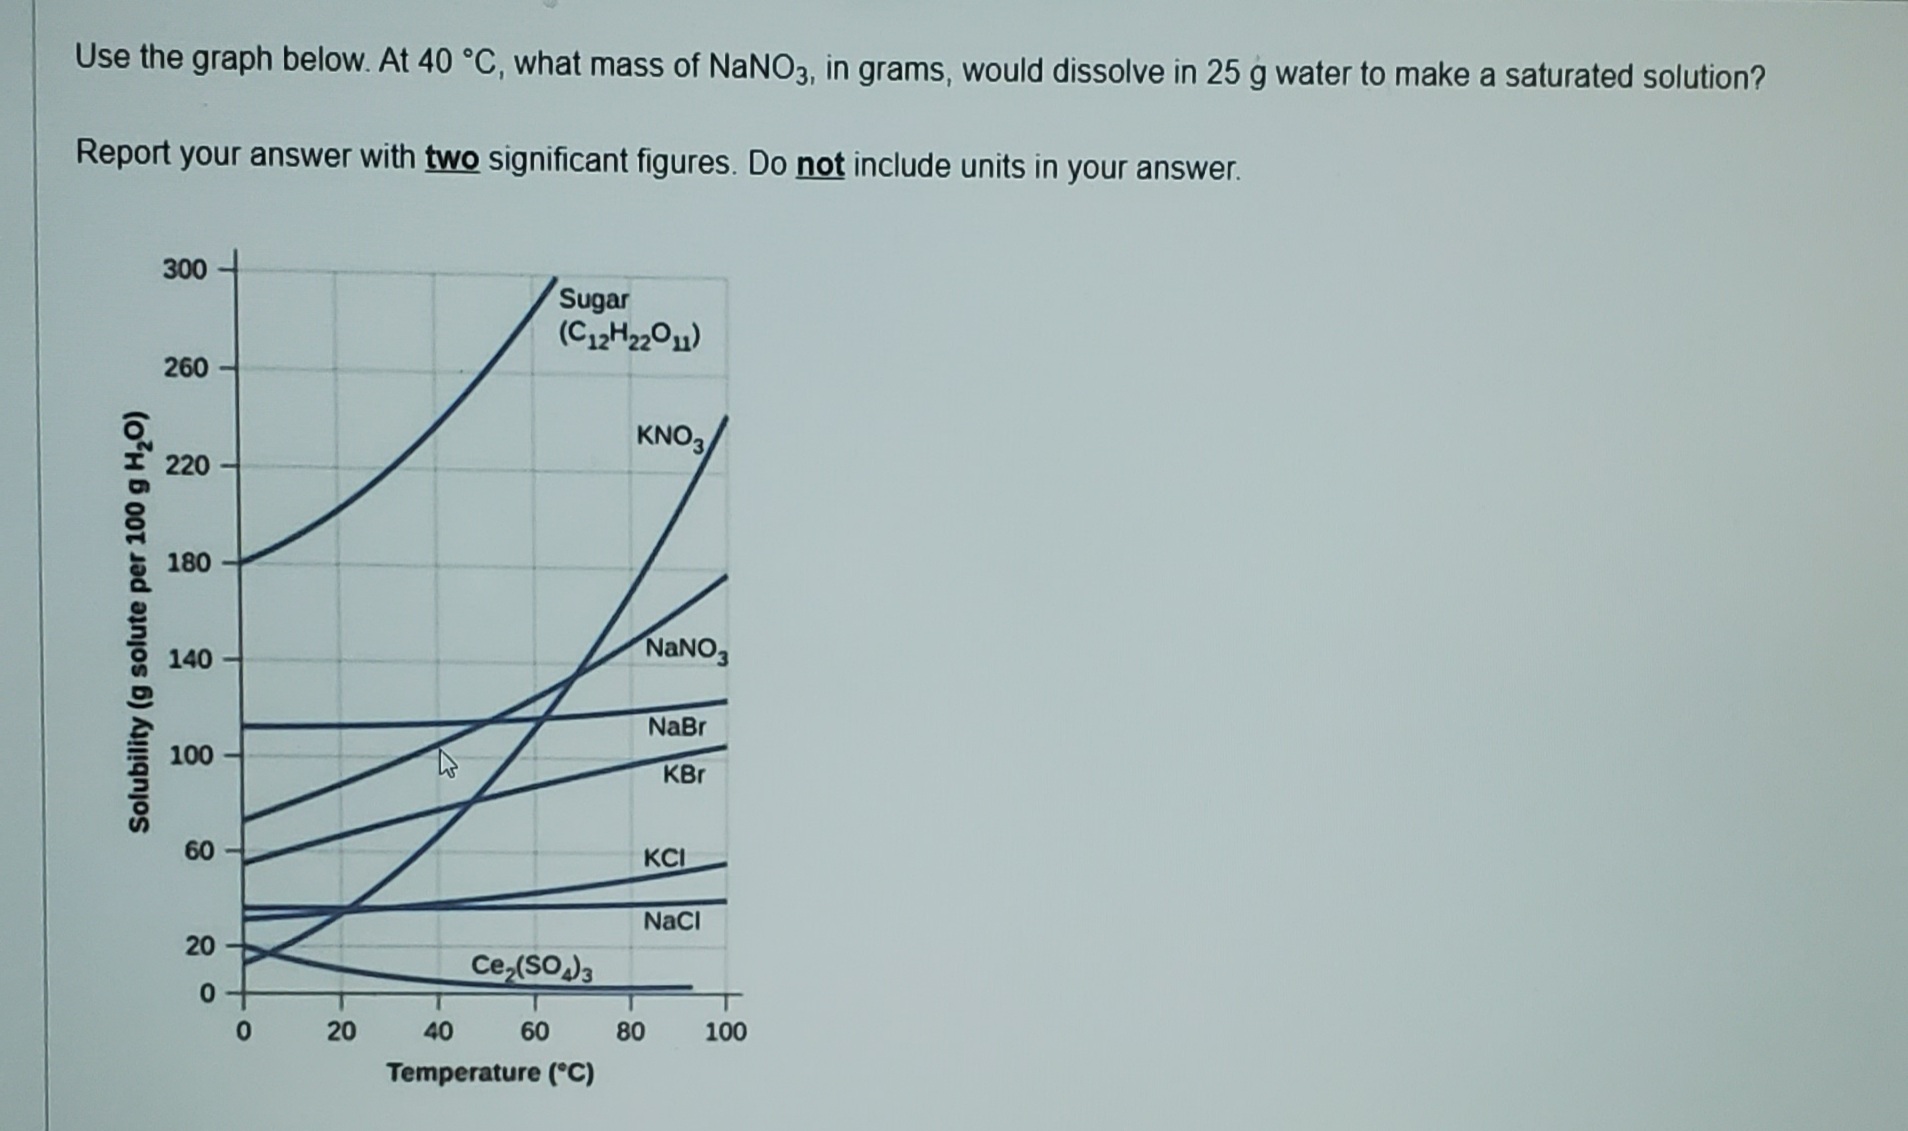 Use the graph below. At 40 °C, what mass of NANO3, in grams, would dissolve in 25 g water to make a saturated solution?
Report your answer with two significant figures. Do not include units in your answer.
300
Sugar
(C12H2201)
260
KNO3
220
180
NANO,
140
NaBr
100
KBr
60
KCI
NaCI
20
Ce,(SO)3
40
60
80
100
Temperature (°C)
Solubility (g solute per 100 g H,O)
20
